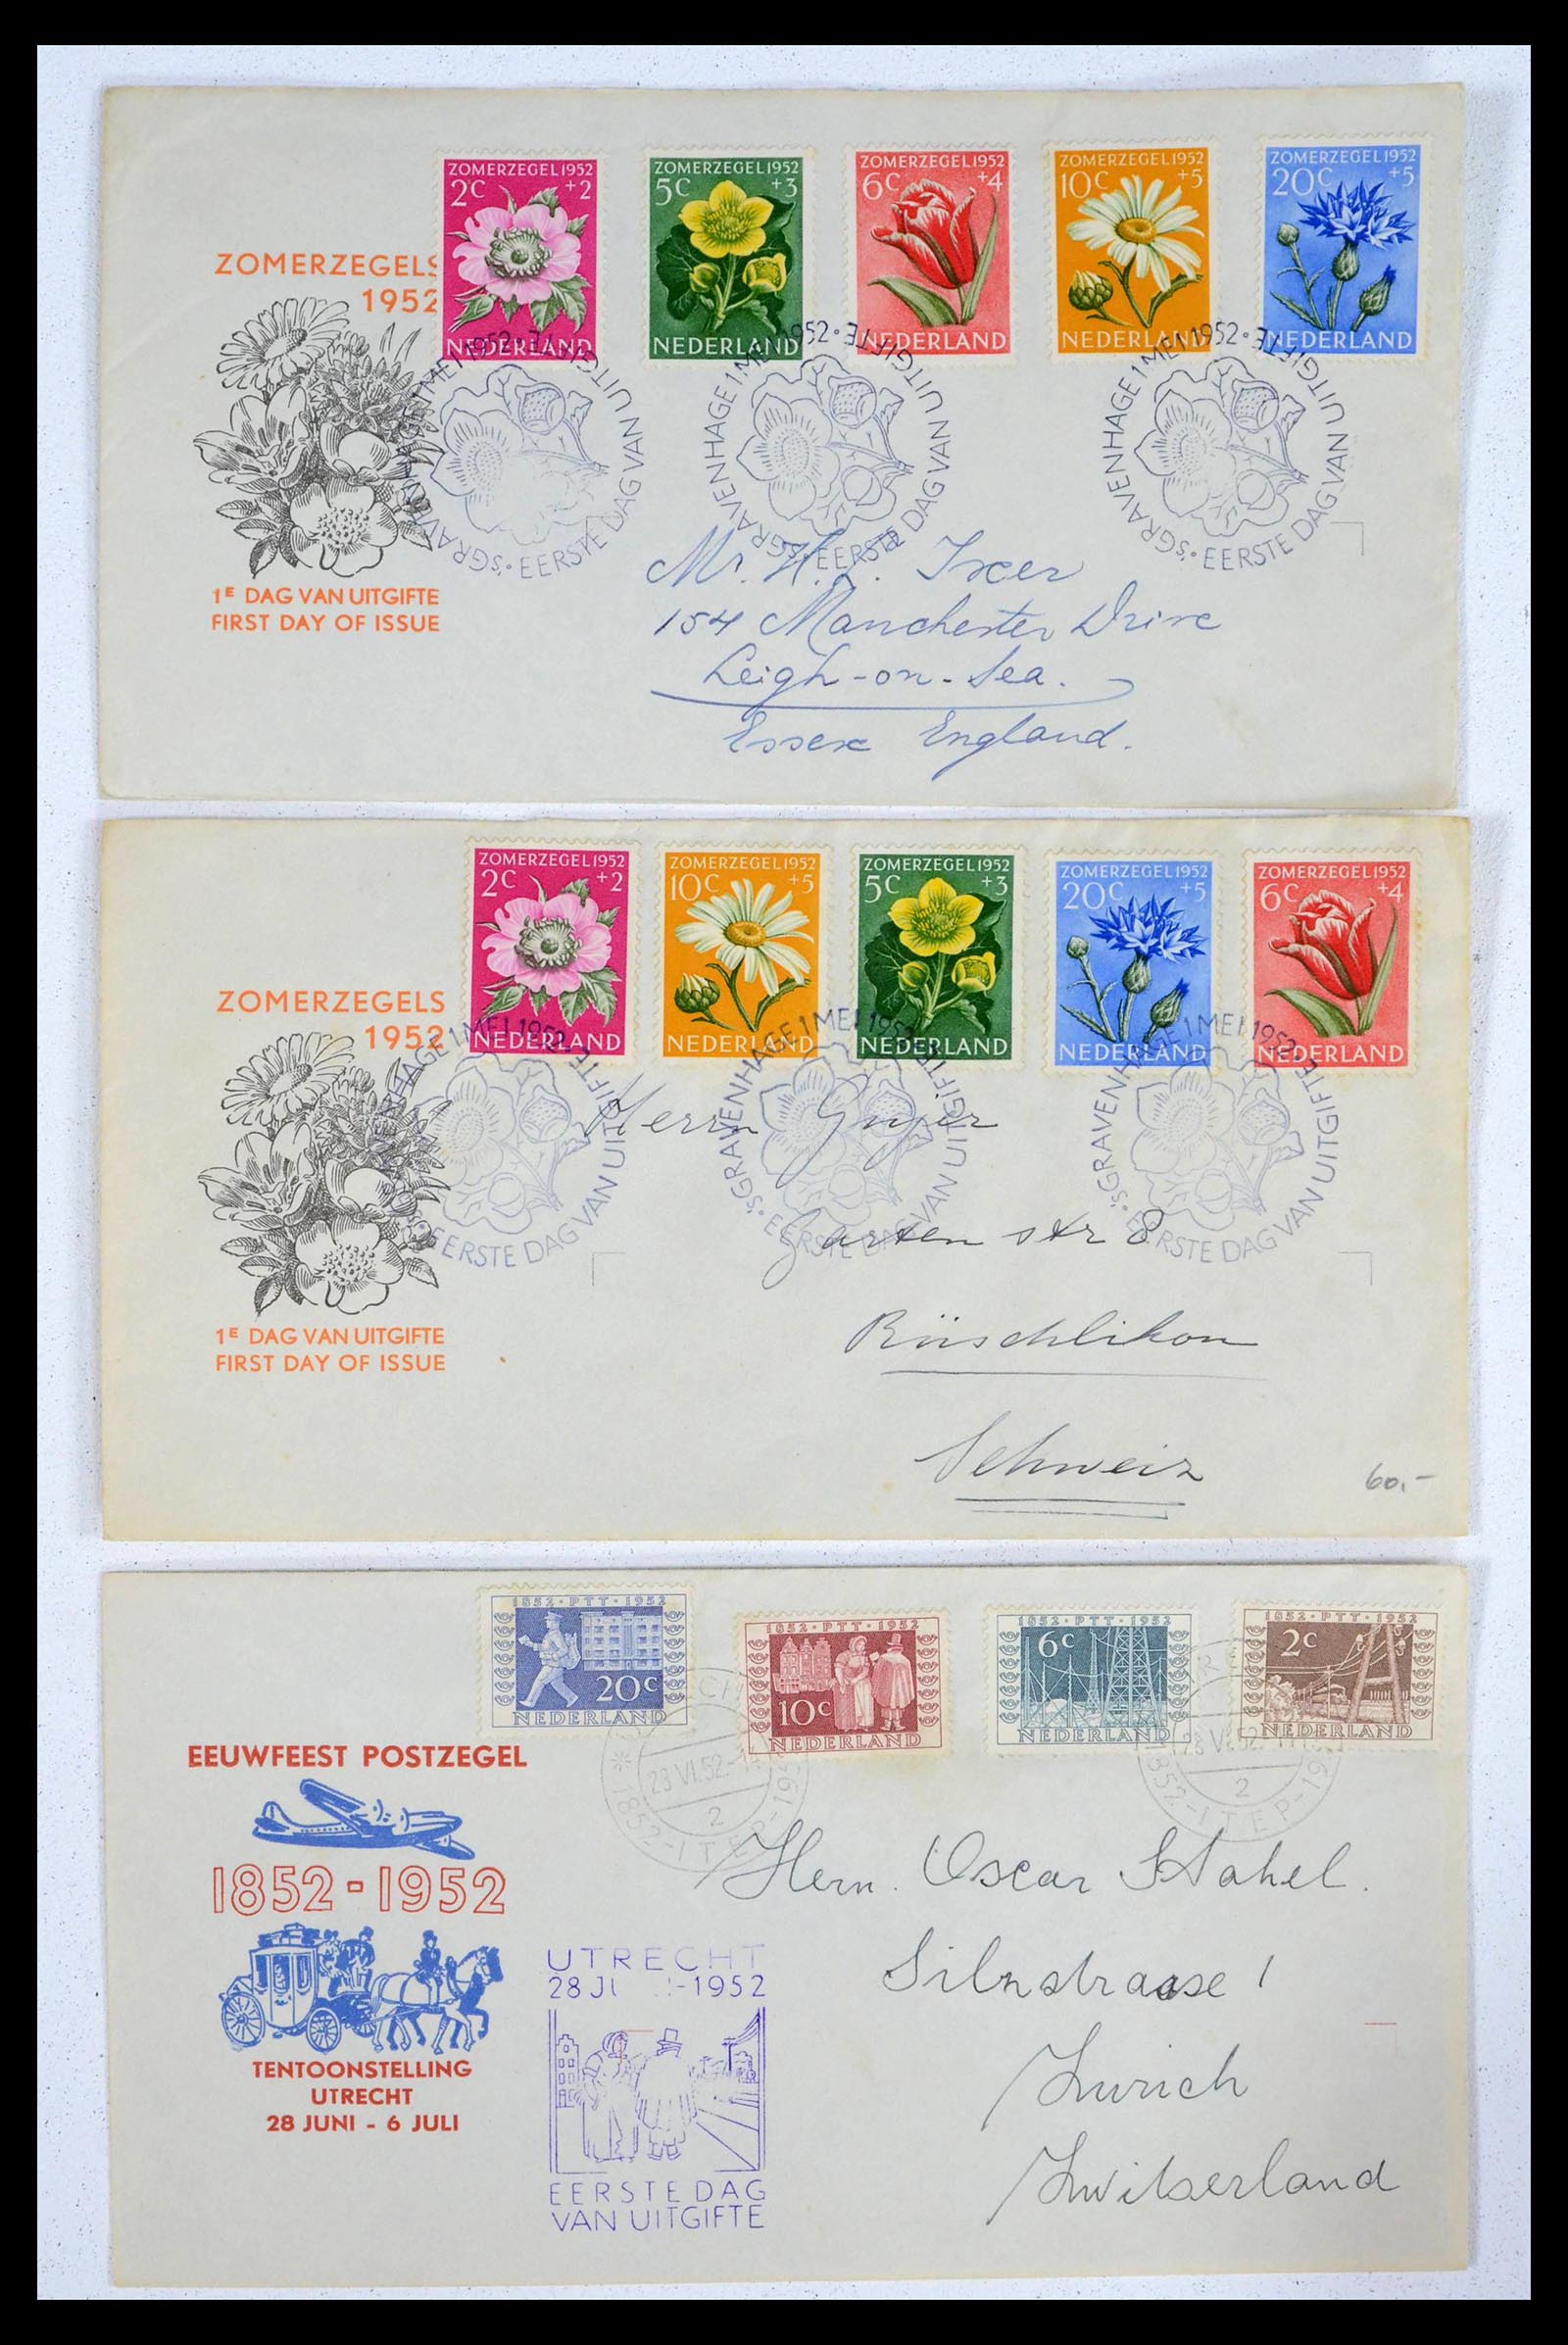 39474 0005 - Stamp collection 39474 Netherlands FDC's 1950-1960.